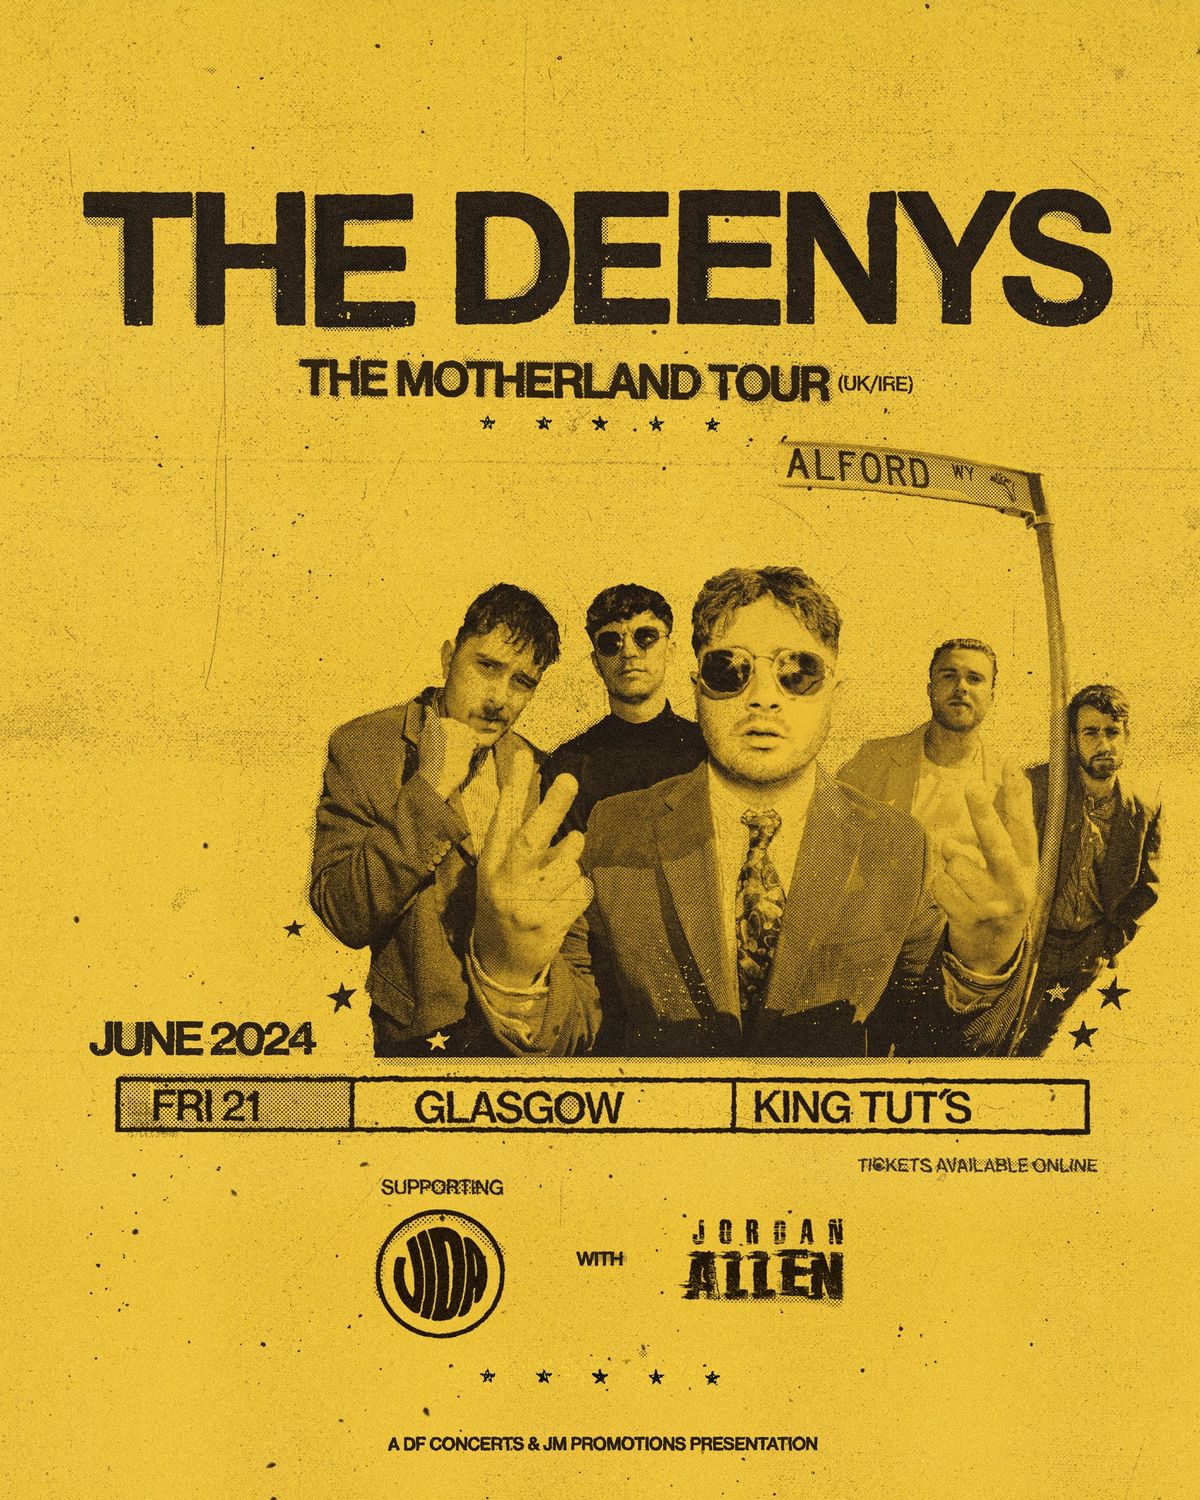 The Deenys - The Motherland Tour - GLASGOW